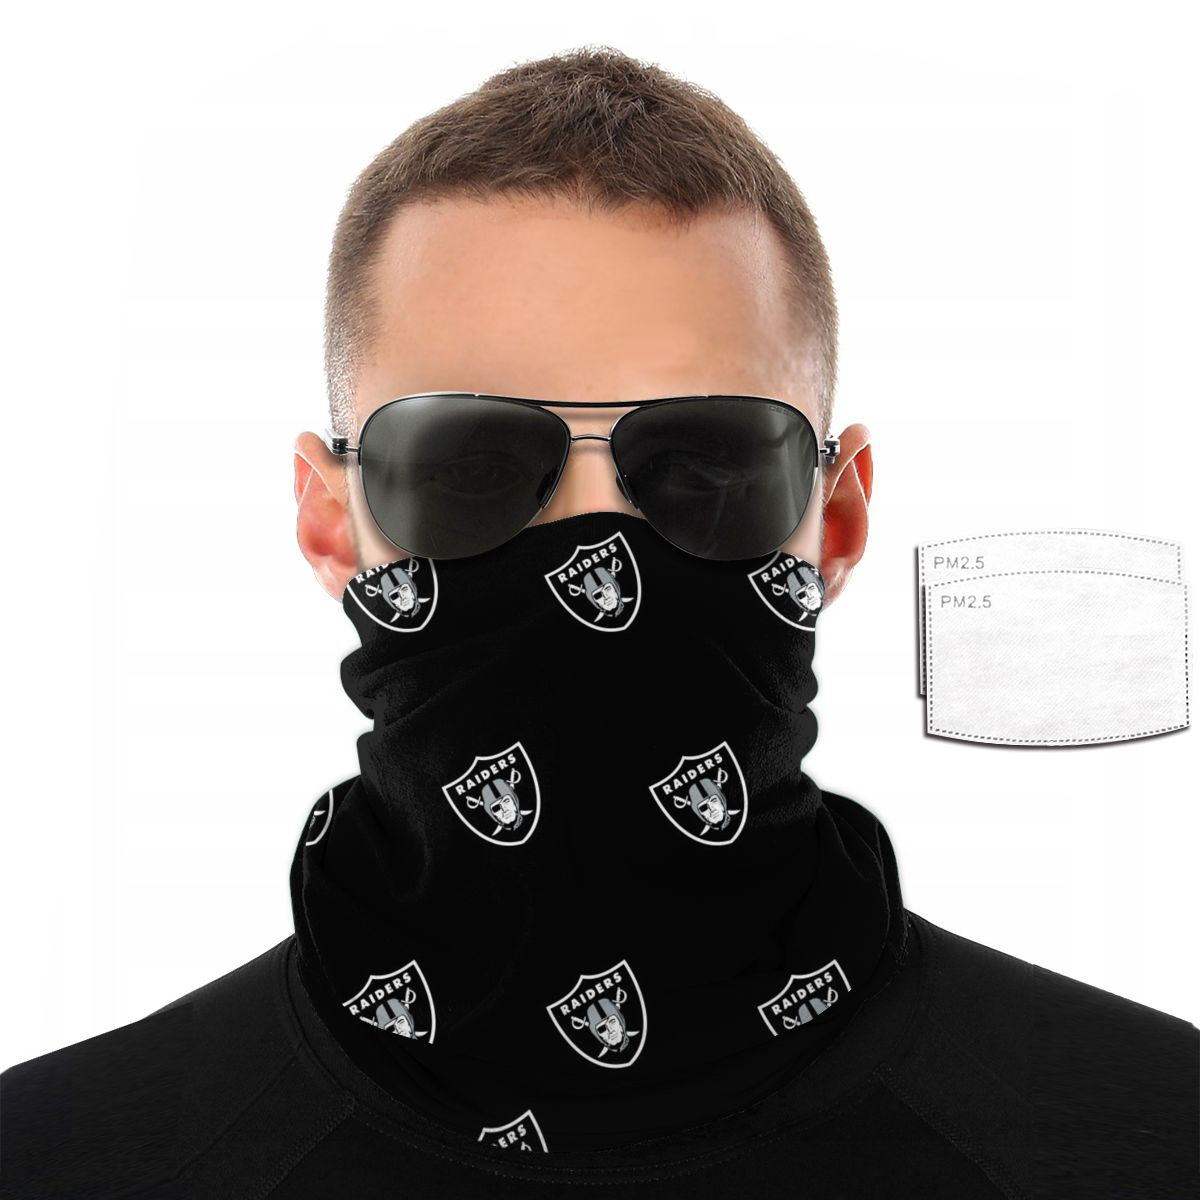 Reusble Mouth Cover Bandanas Oakland Raiders Variety Head Scarf Face Mask With PM 2.5 Filter